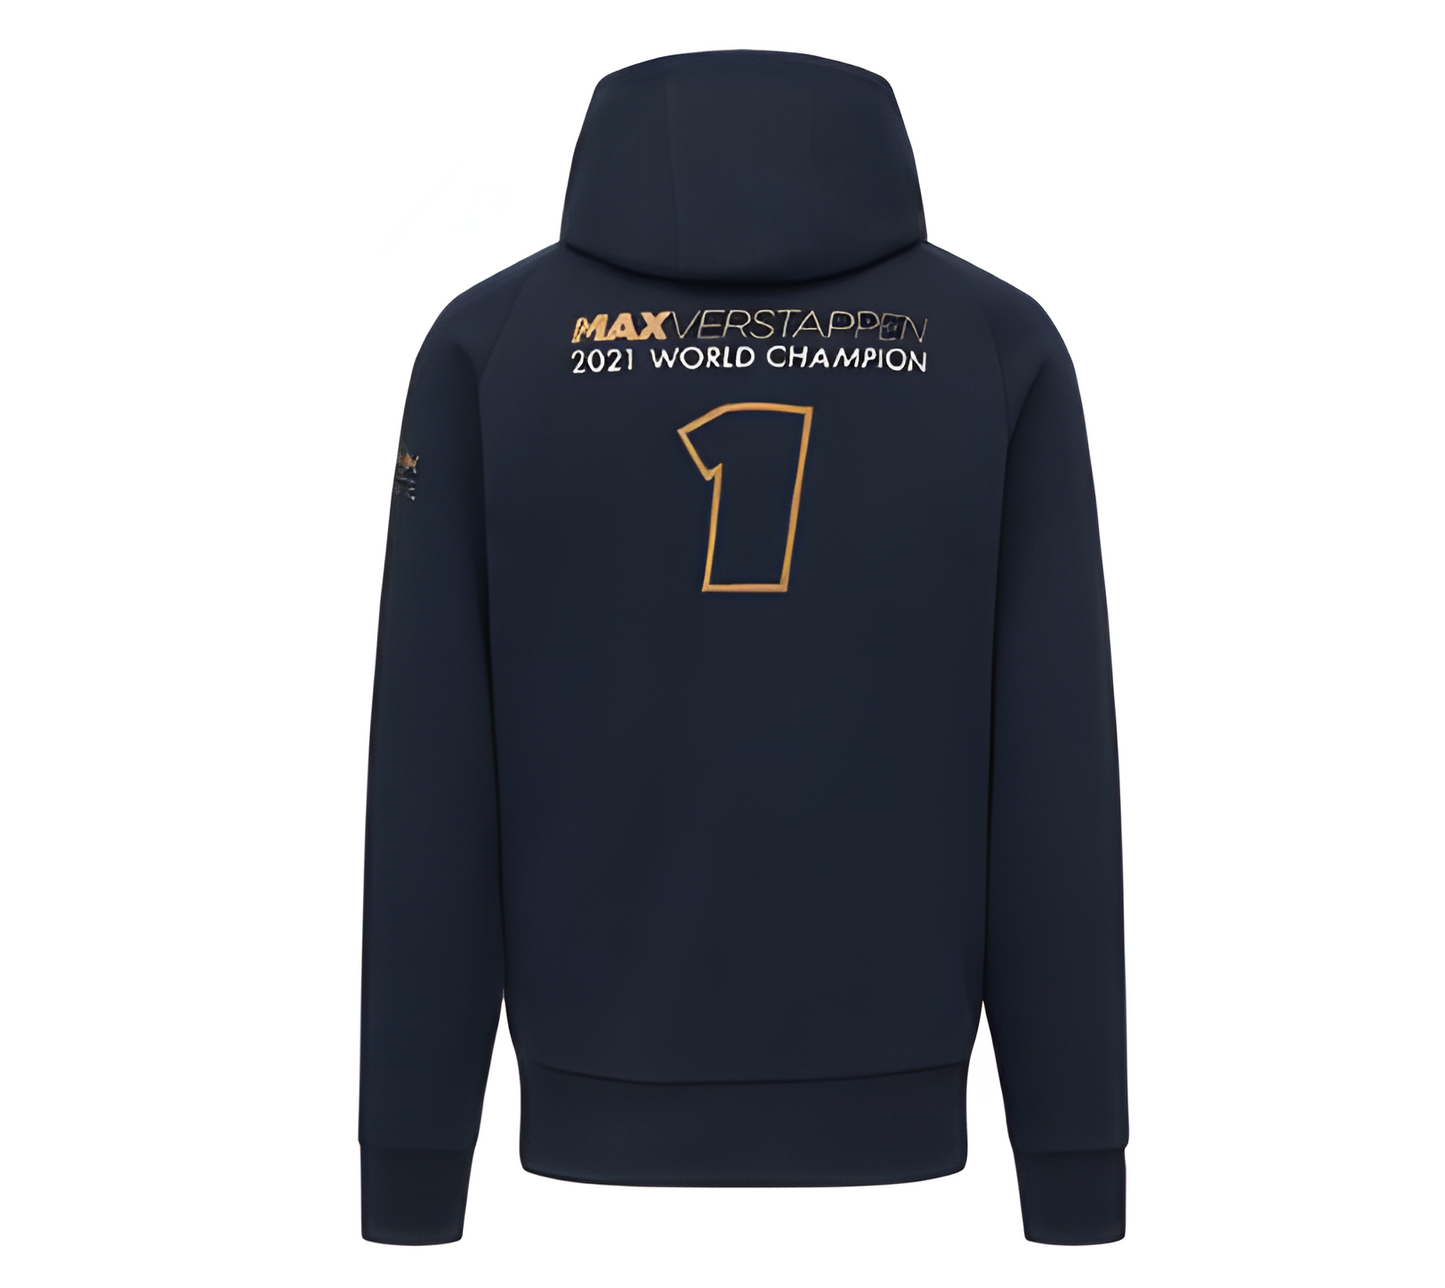 Red bull racing, fanwear, kids clothing, Formula 1 apparel, Take a lot, brand clothing, south Africa, Johannesburg, cape town clothing, Hoodie, kids clothes, MR price